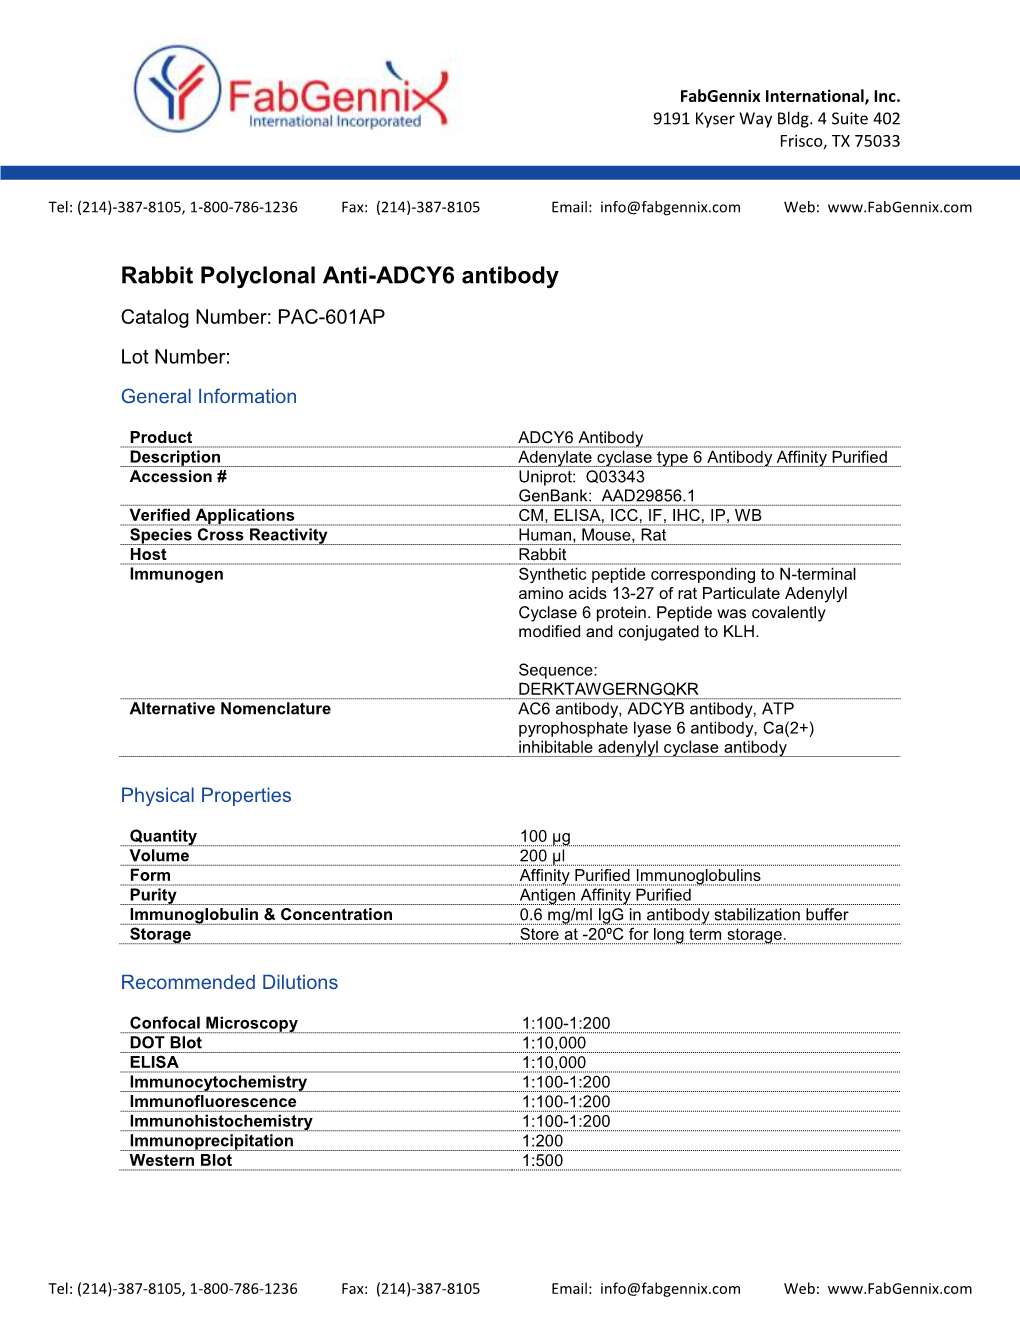 ADCY6 Antibody Catalog Number: PAC-601AP Lot Number: General Information